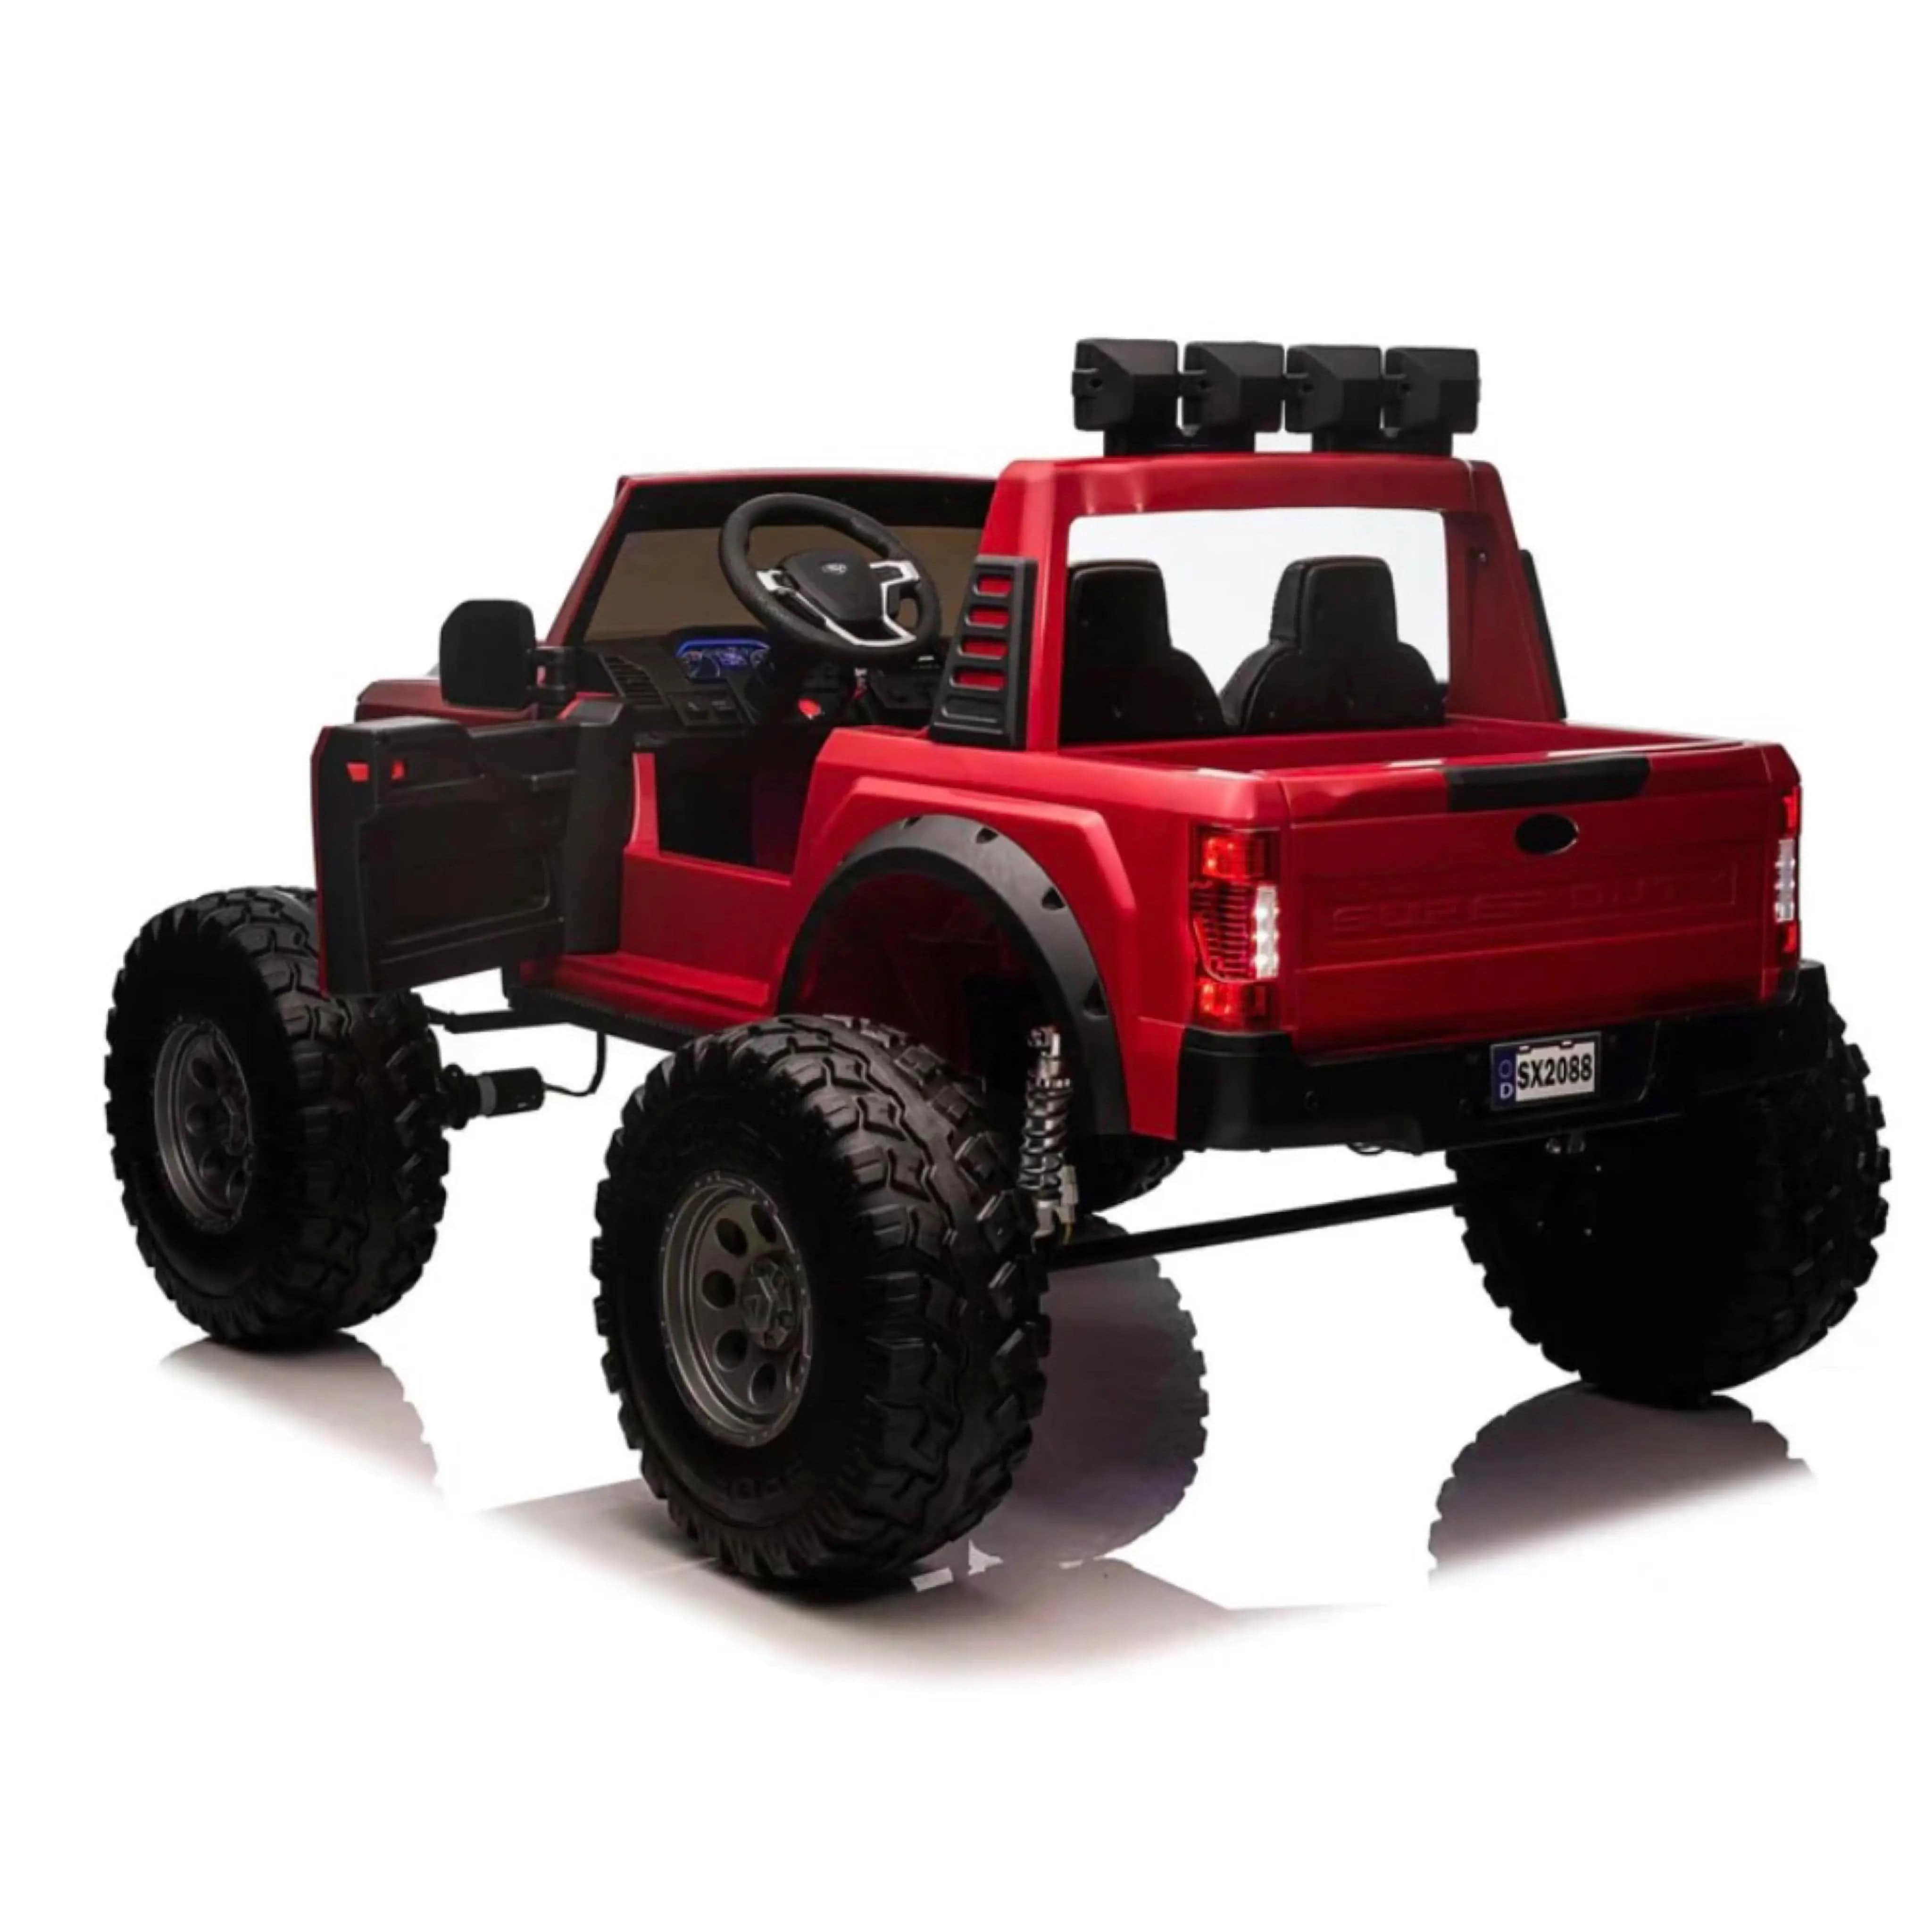 F450 Lifted 4x4 Electric Kid Jeep Car w/ 16" Rubber Tires Lifted R&G TOYS